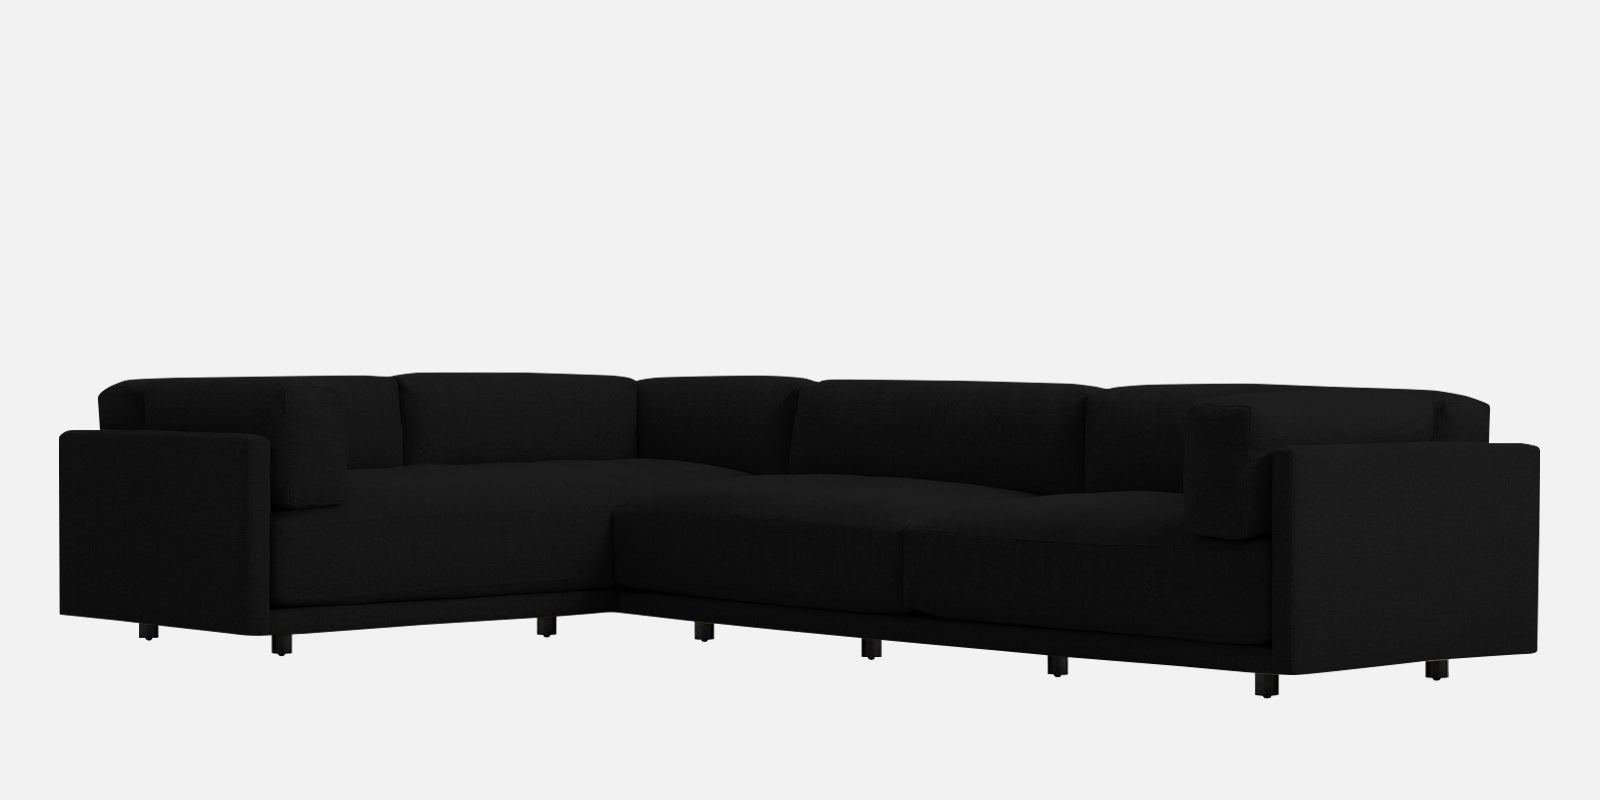 Nixon Fabric 6 Seater RHS Sectional Sofa In Zed Black Colour